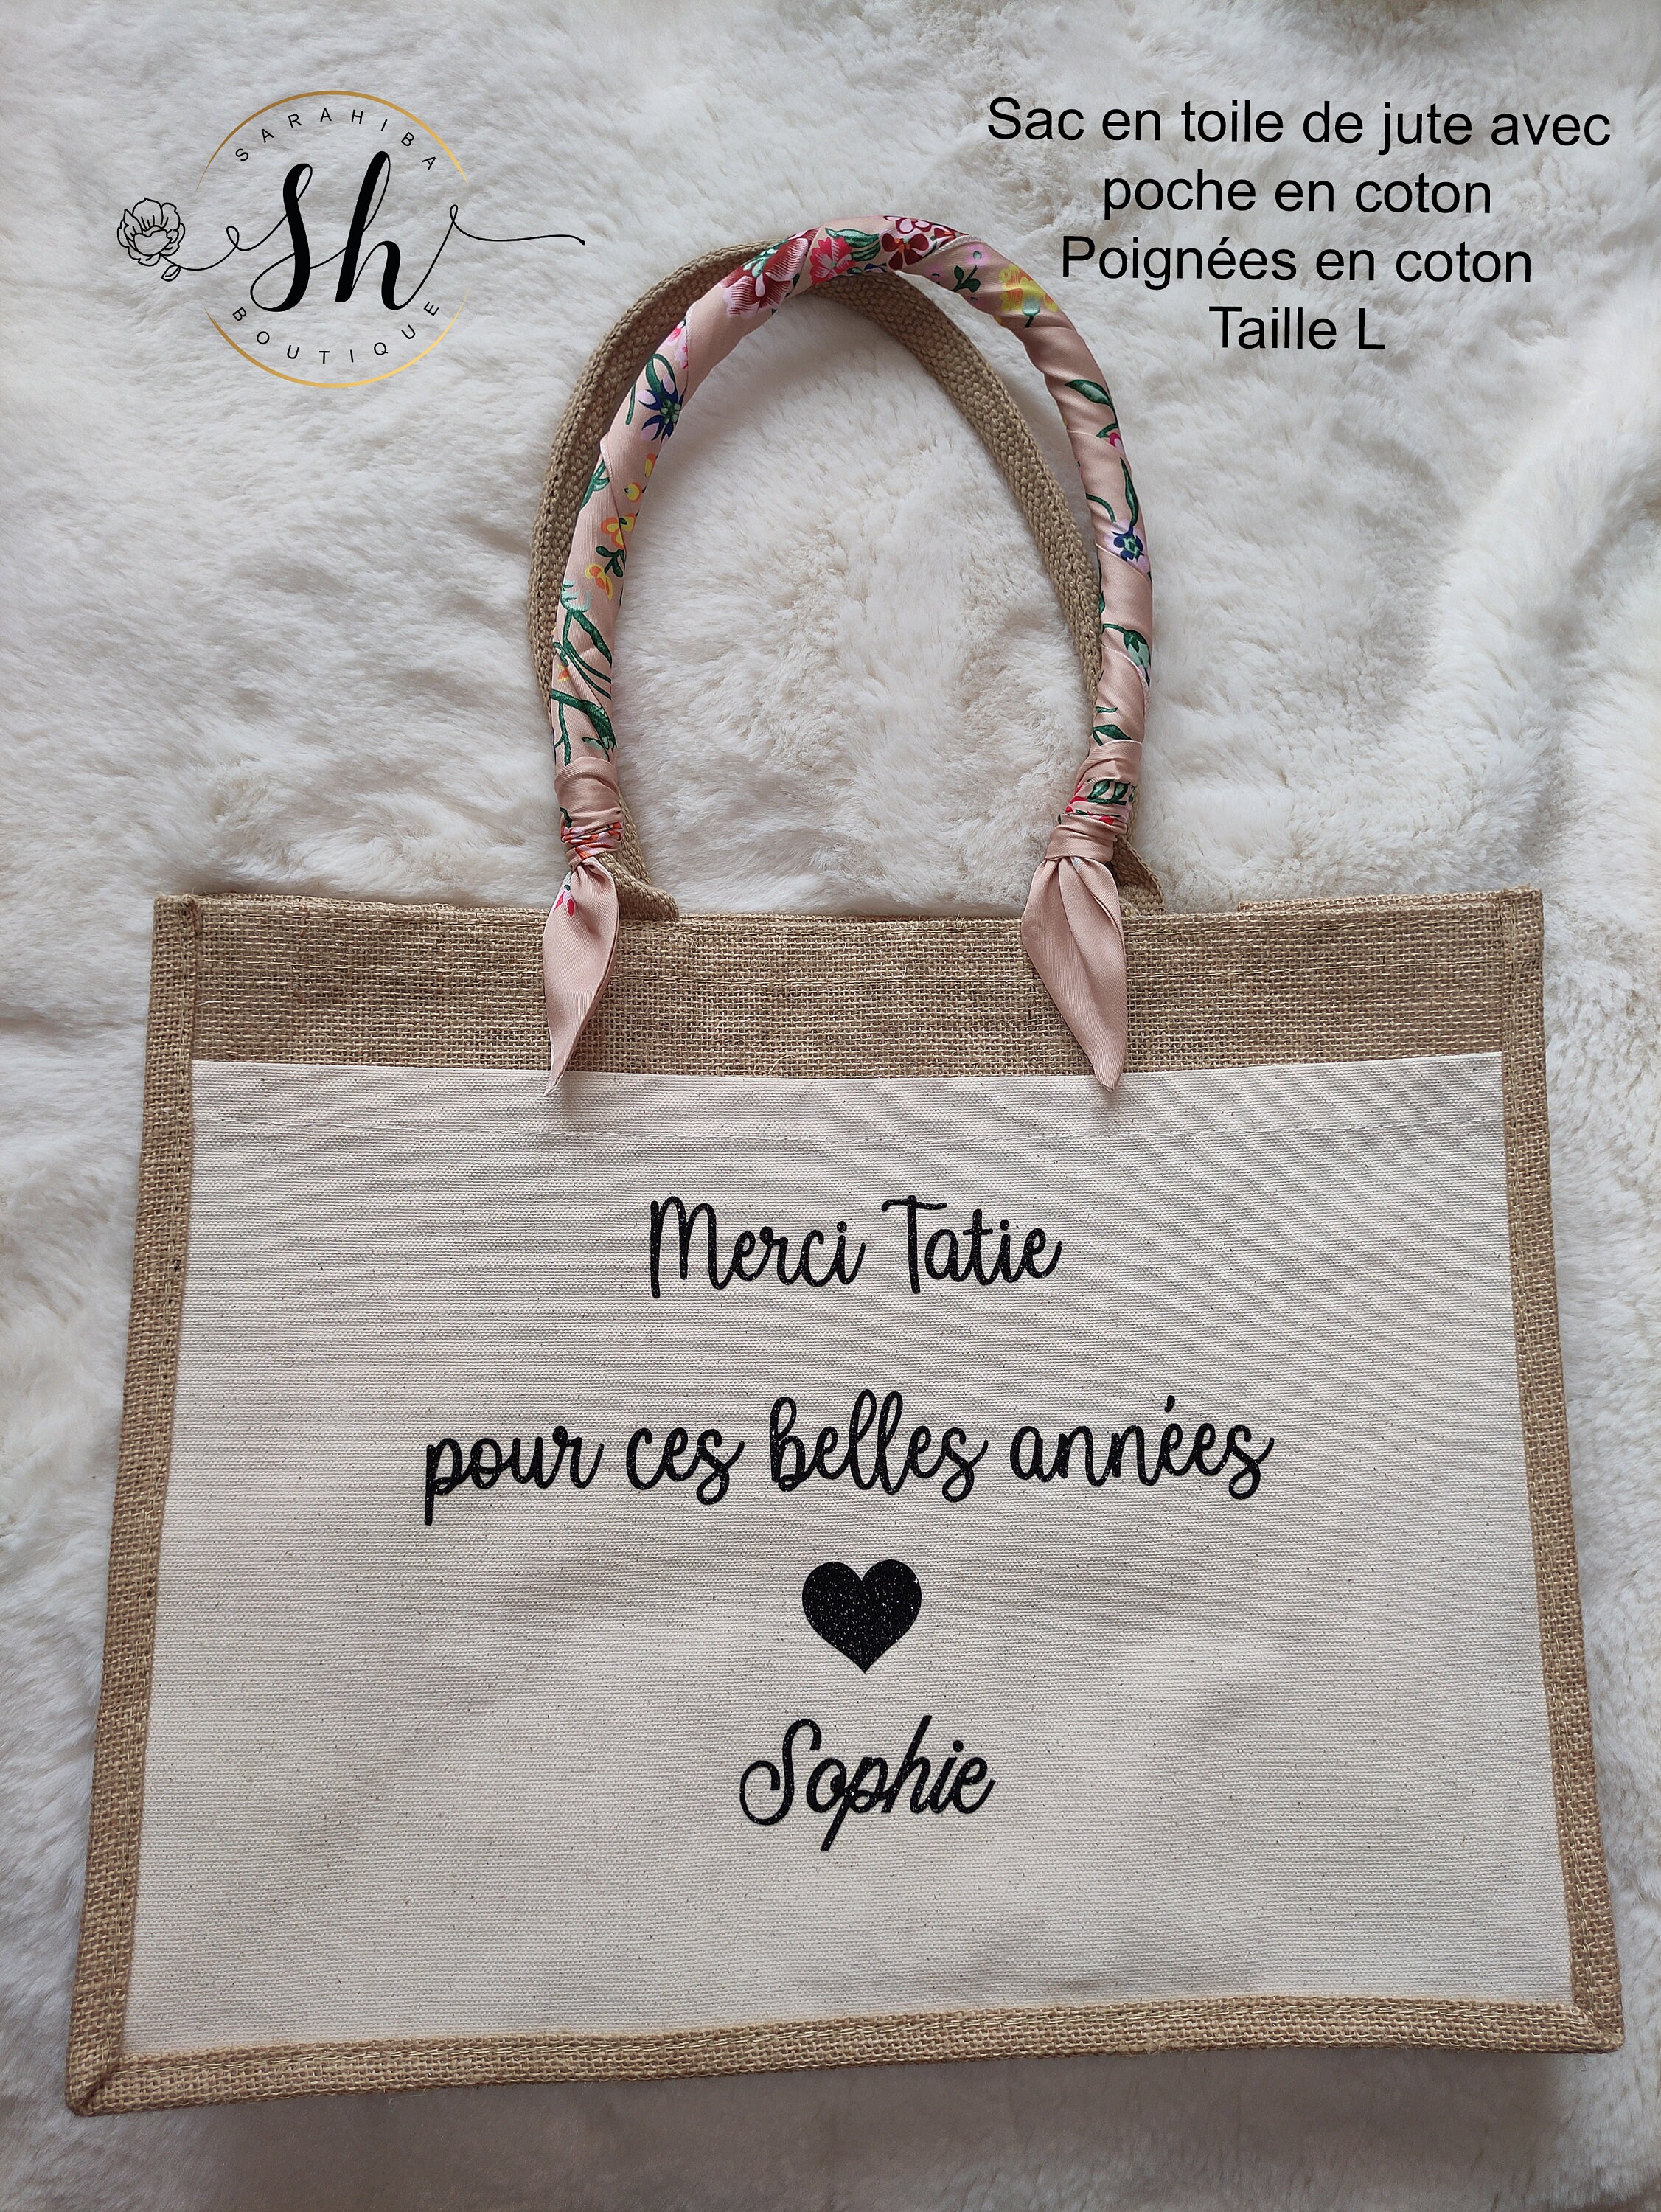 Personalized Jute bag-Sparkling/Two-tone/Grey/With Cotton Pocket -Sizes S-M-L - Scarf Option- Christmas Gift